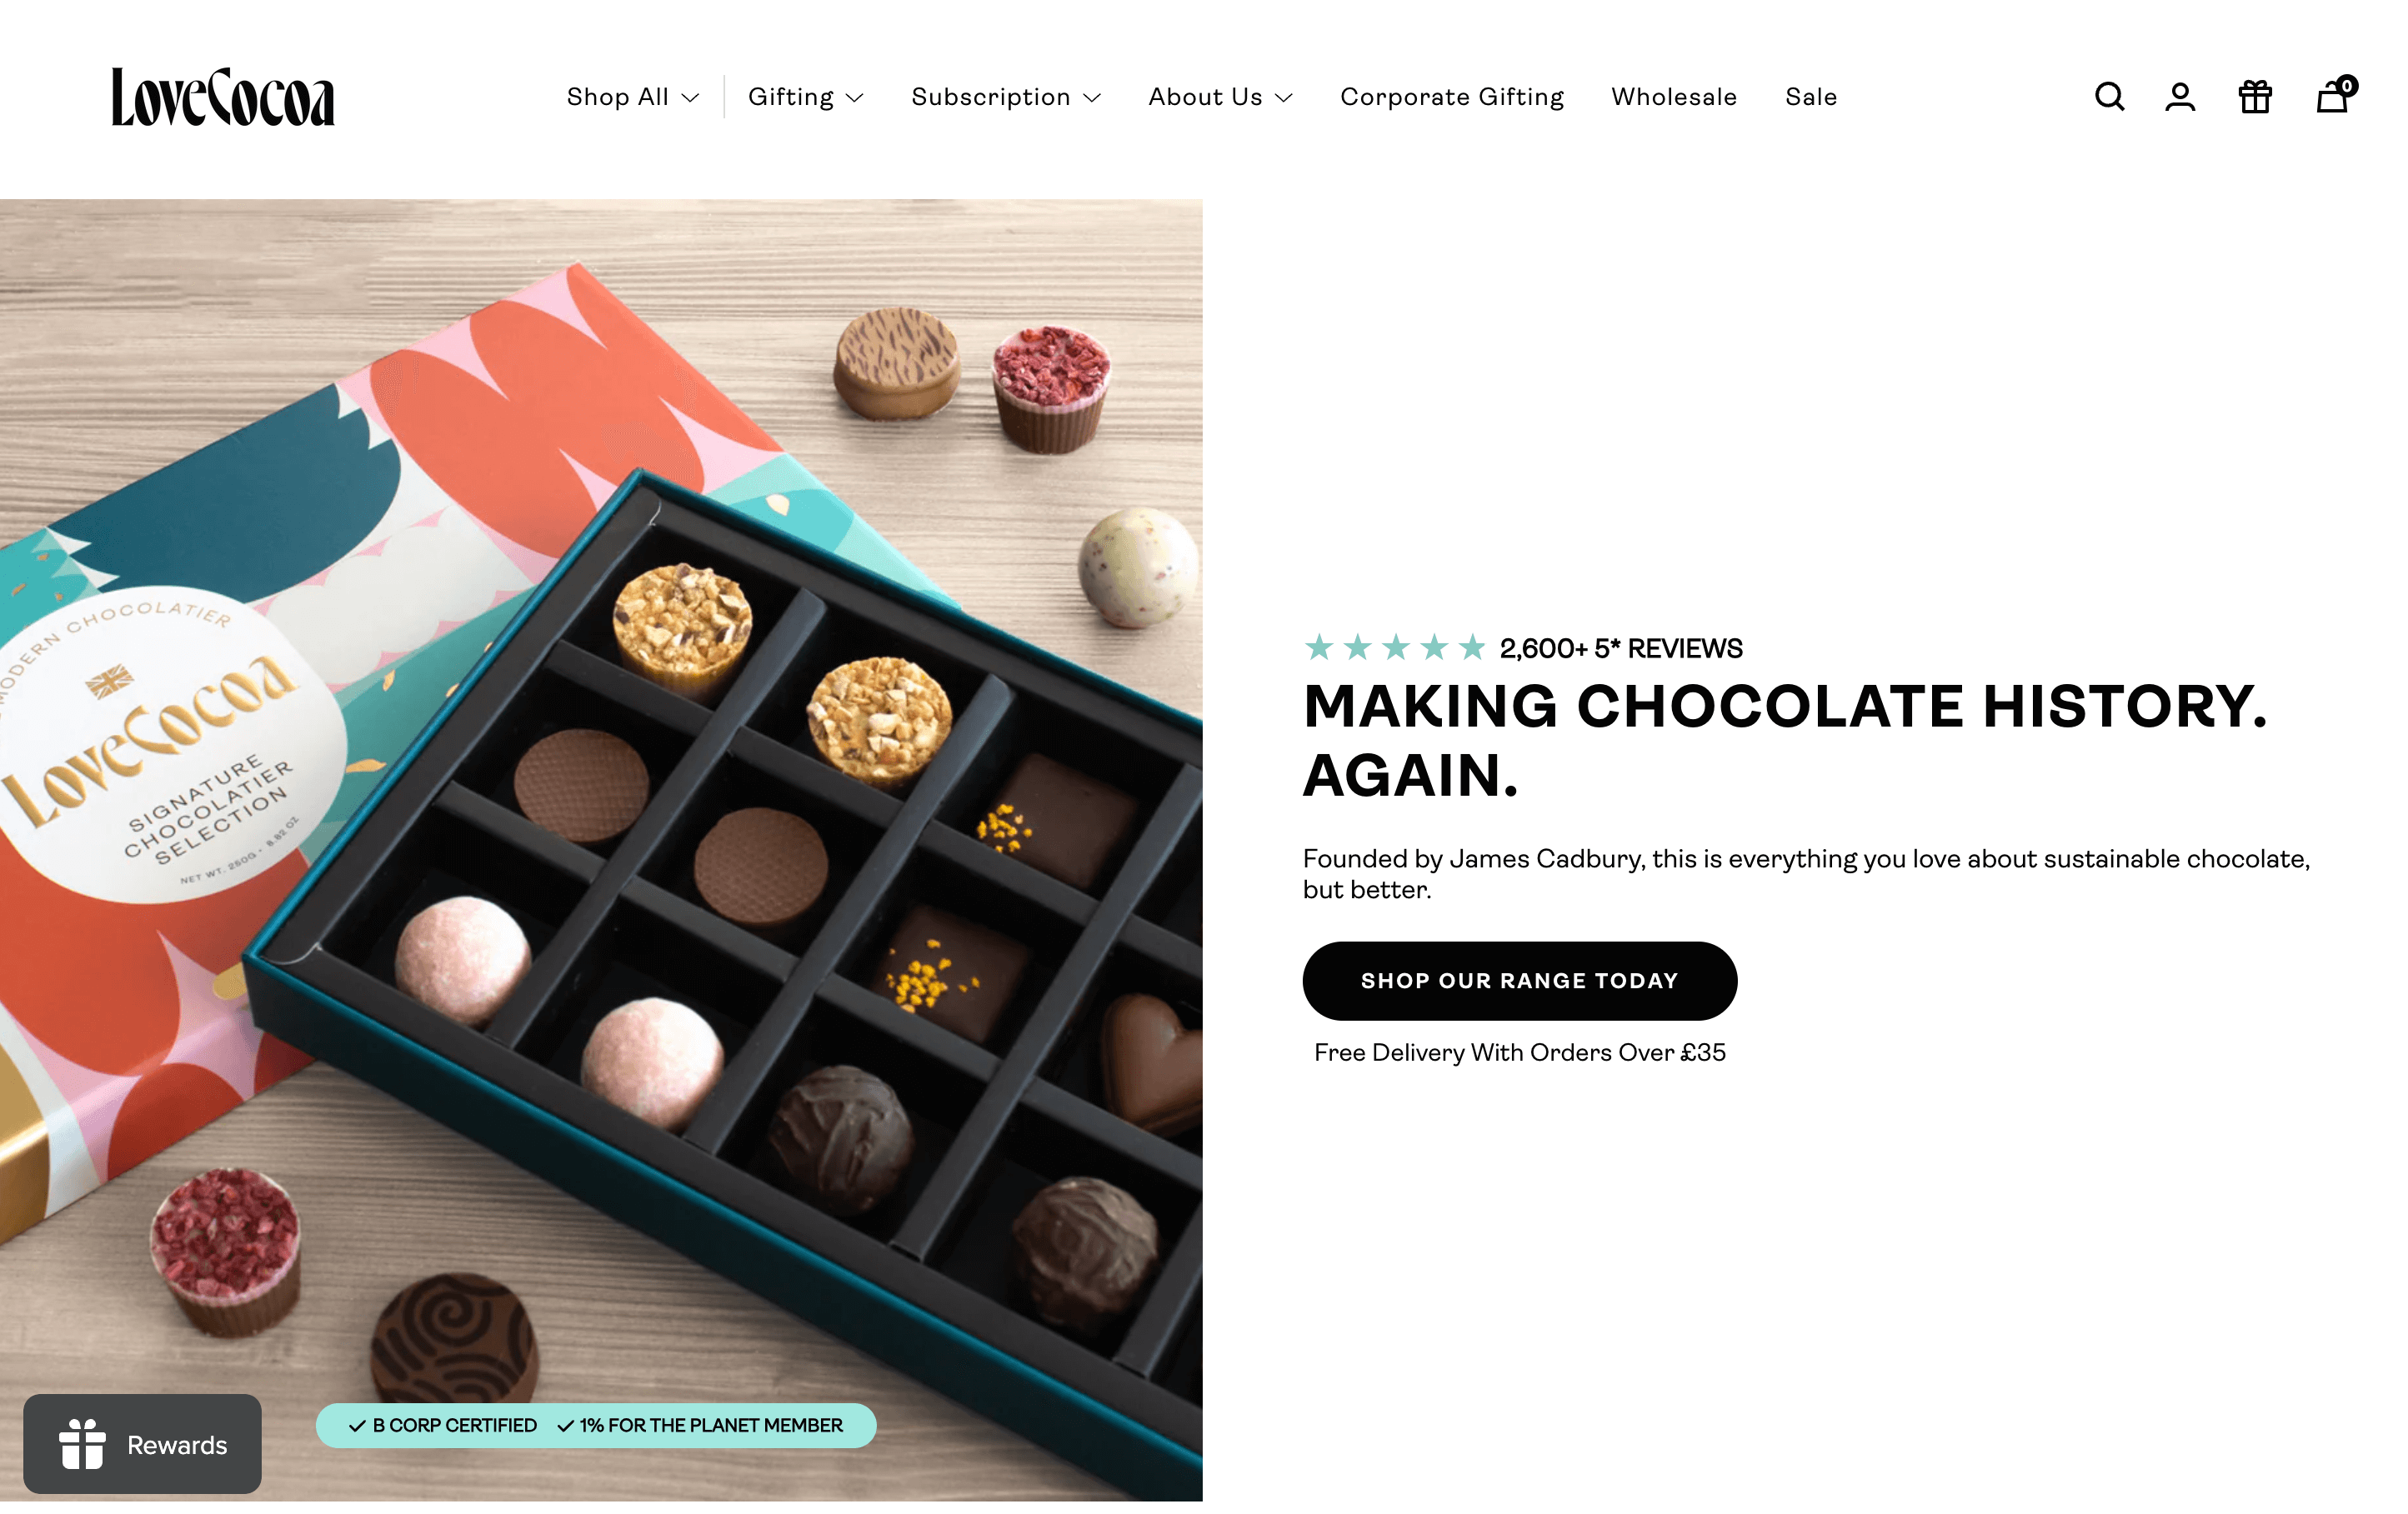 A screenshot of Love Cocoa’s homepage showing a box of its chocolate truffles. 